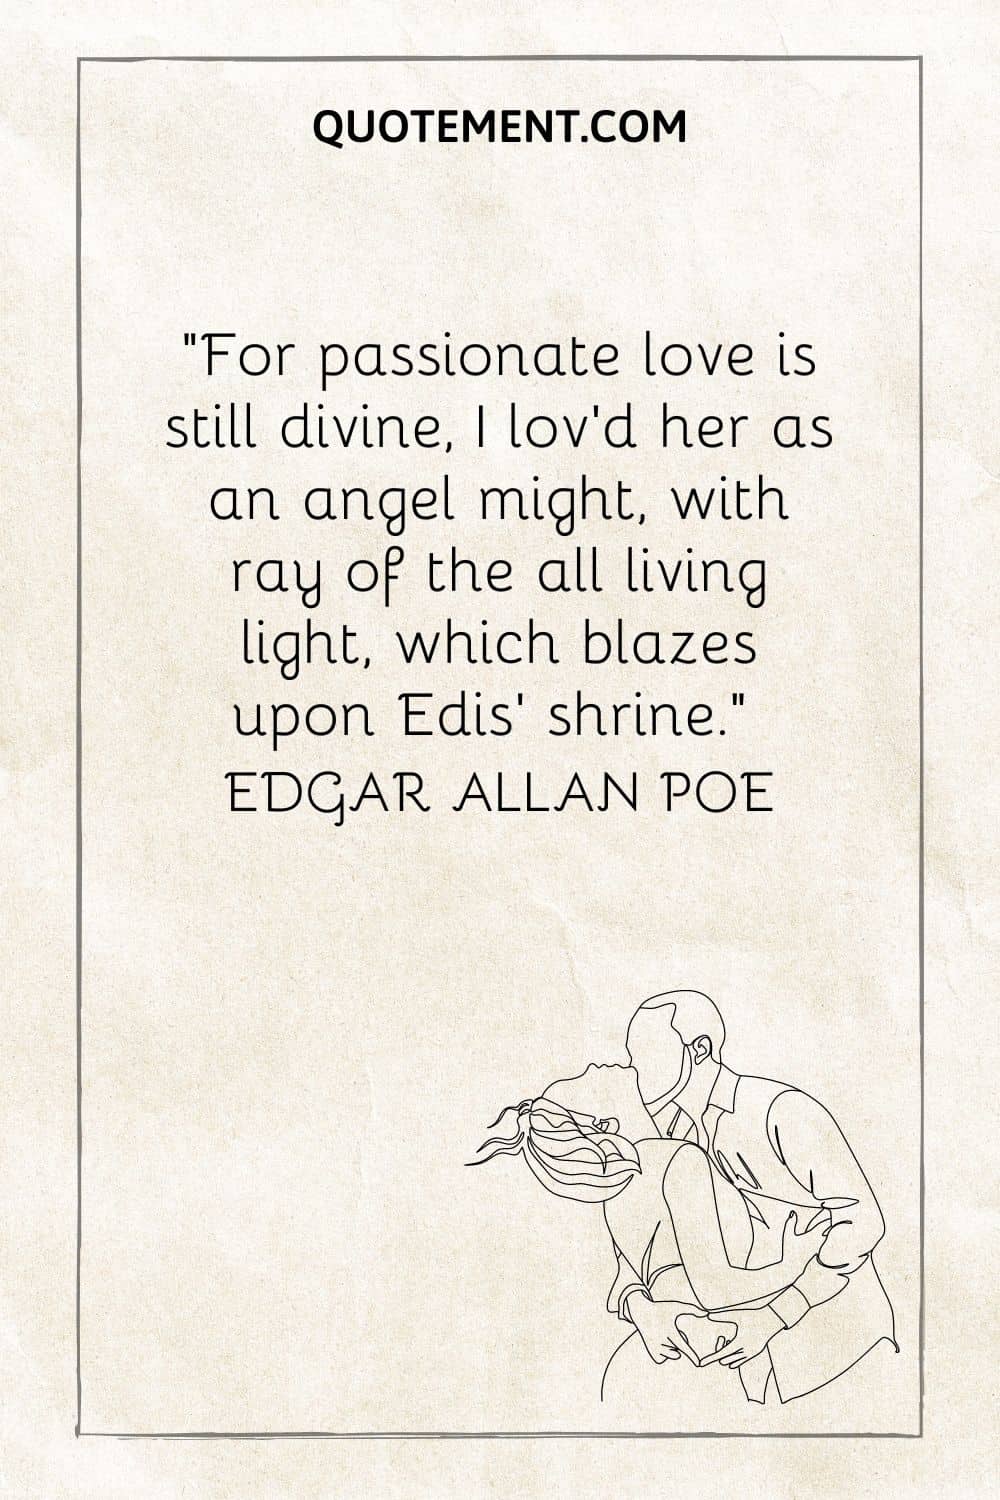 For passionate love is still divine, I lov’d her as an angel might, with ray of the all living light, which blazes upon Edis’ shrine. — Edgar Allan Poe